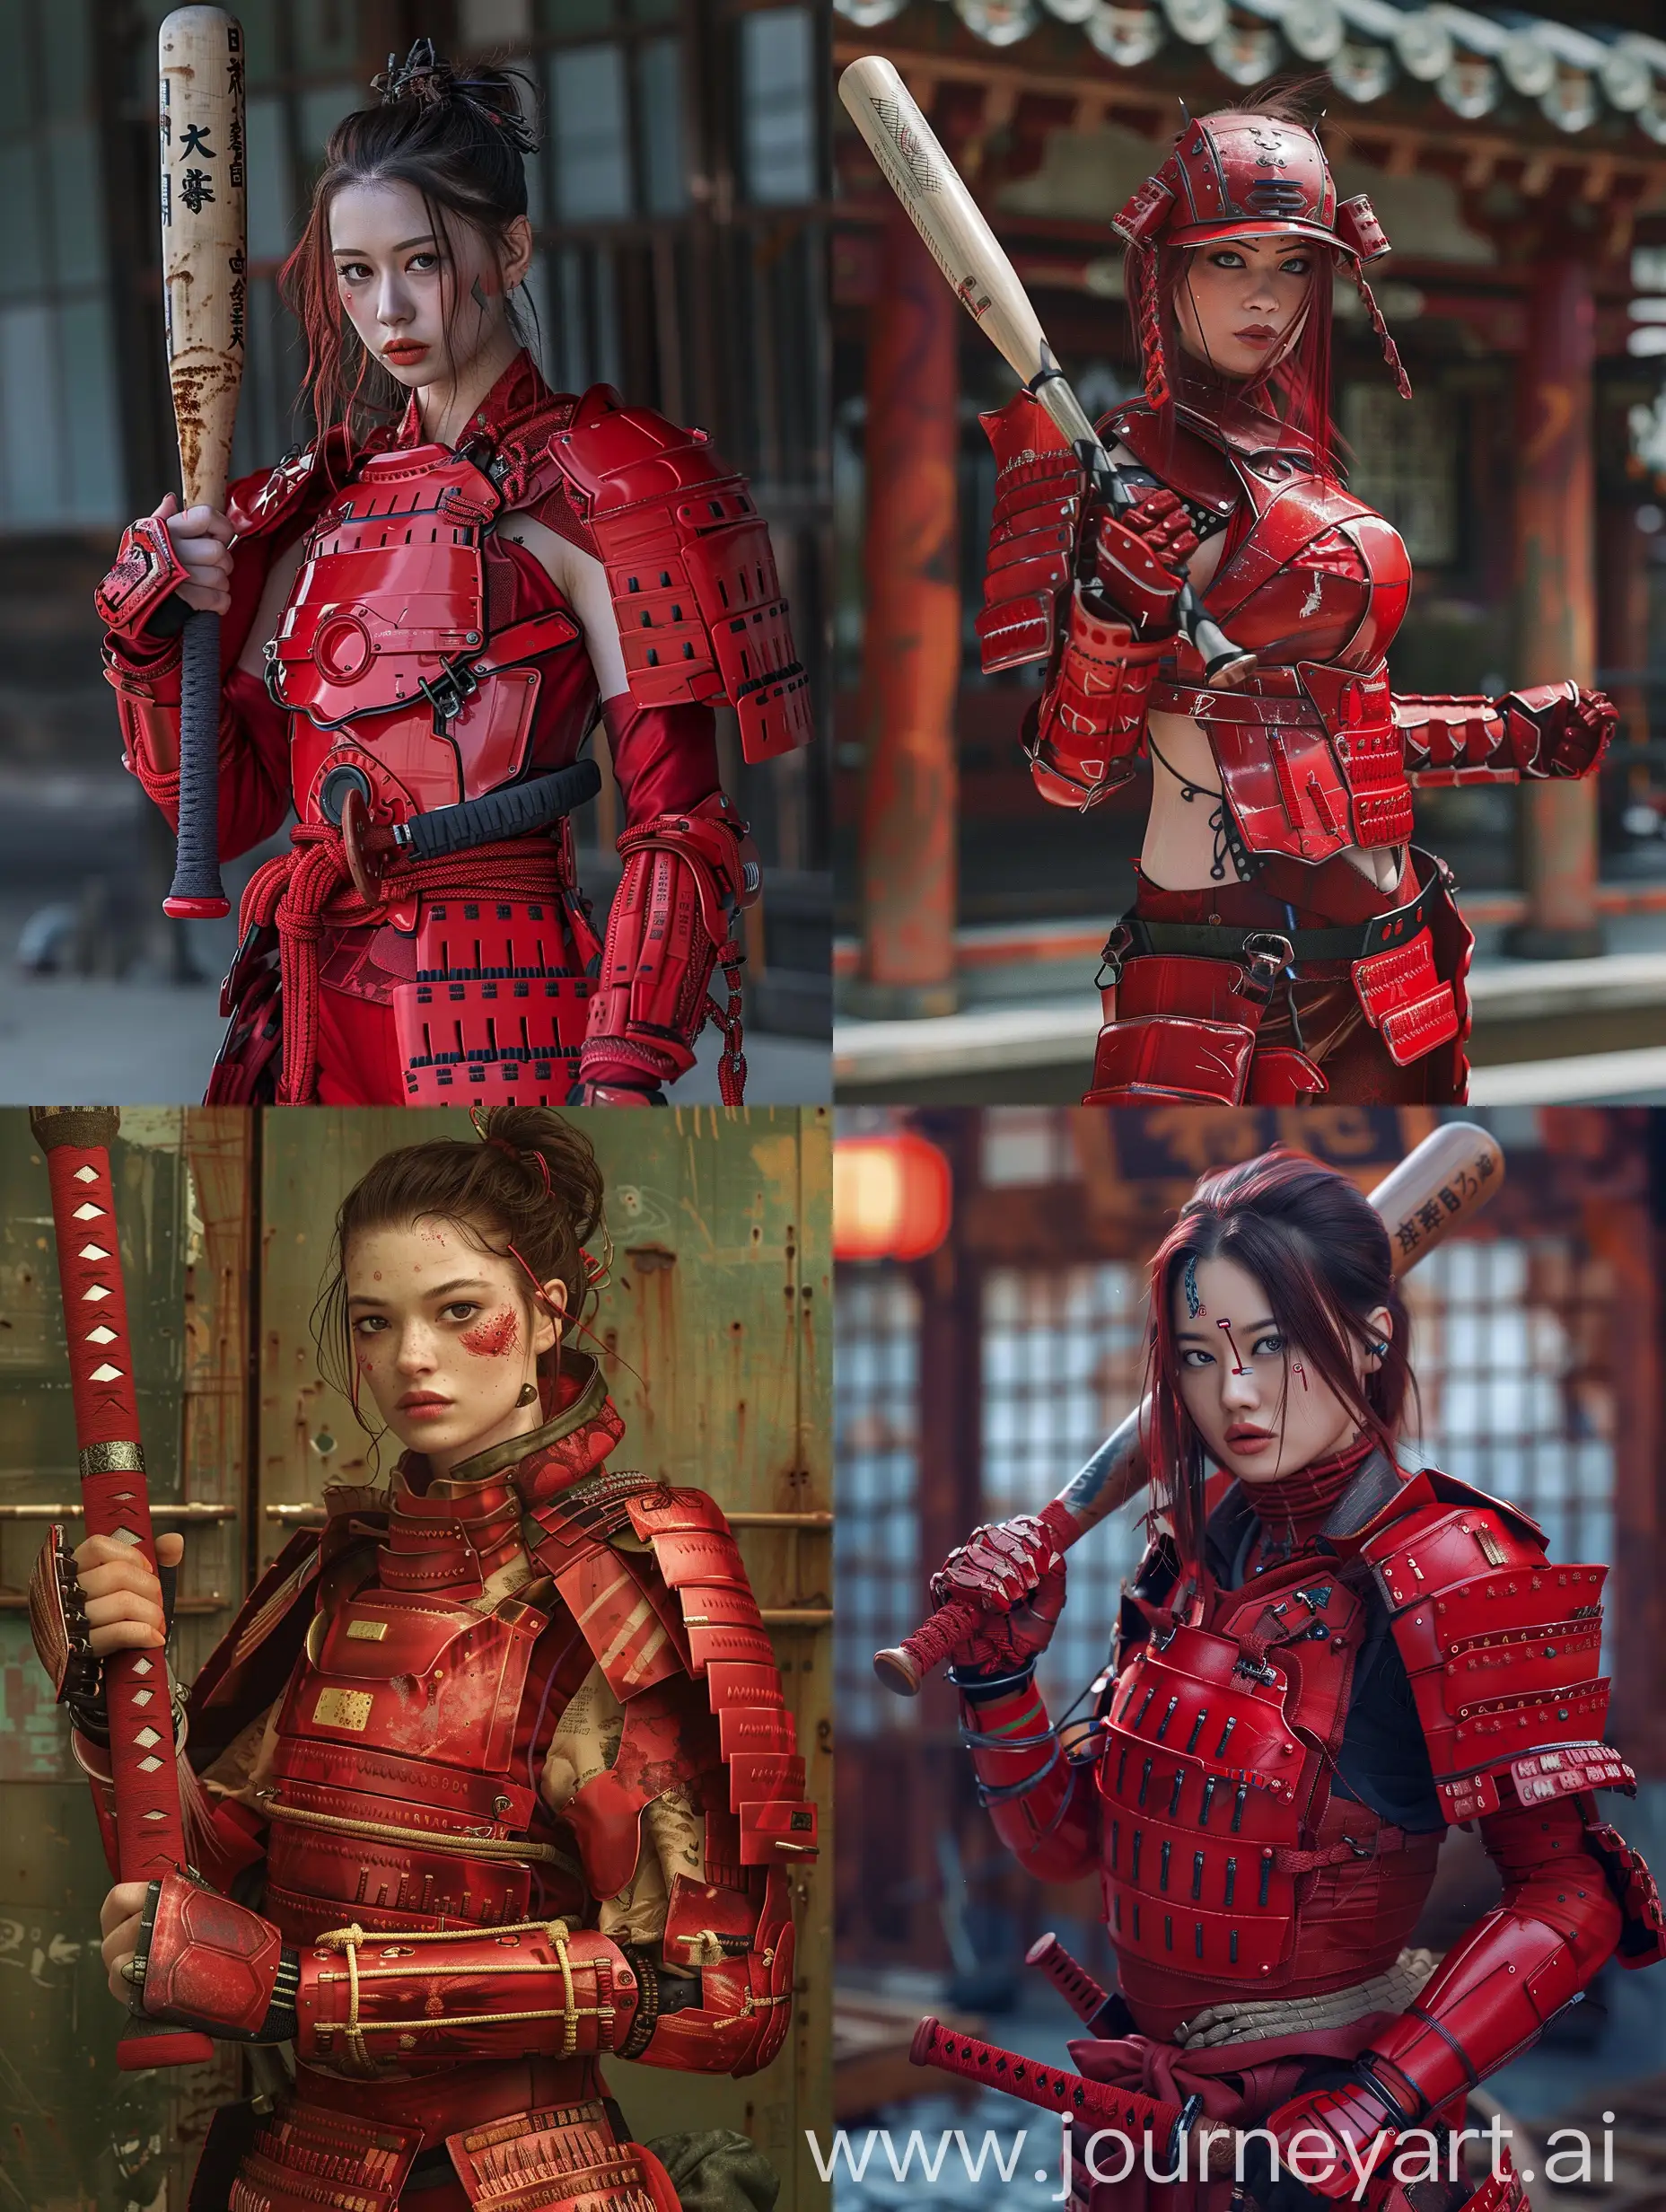 there is a woman in a red samurai suit holding a baseball bat, female samurai, inspired by Kanō Hōgai, samurai style, dressed in samurai armour, high-tech red armor, wearing techwear and armor, segmented armor and sashimono, very beautiful cyberpunk samurai, chinese armor, lady in red armor, japanese warrior, wearing japanese techwear